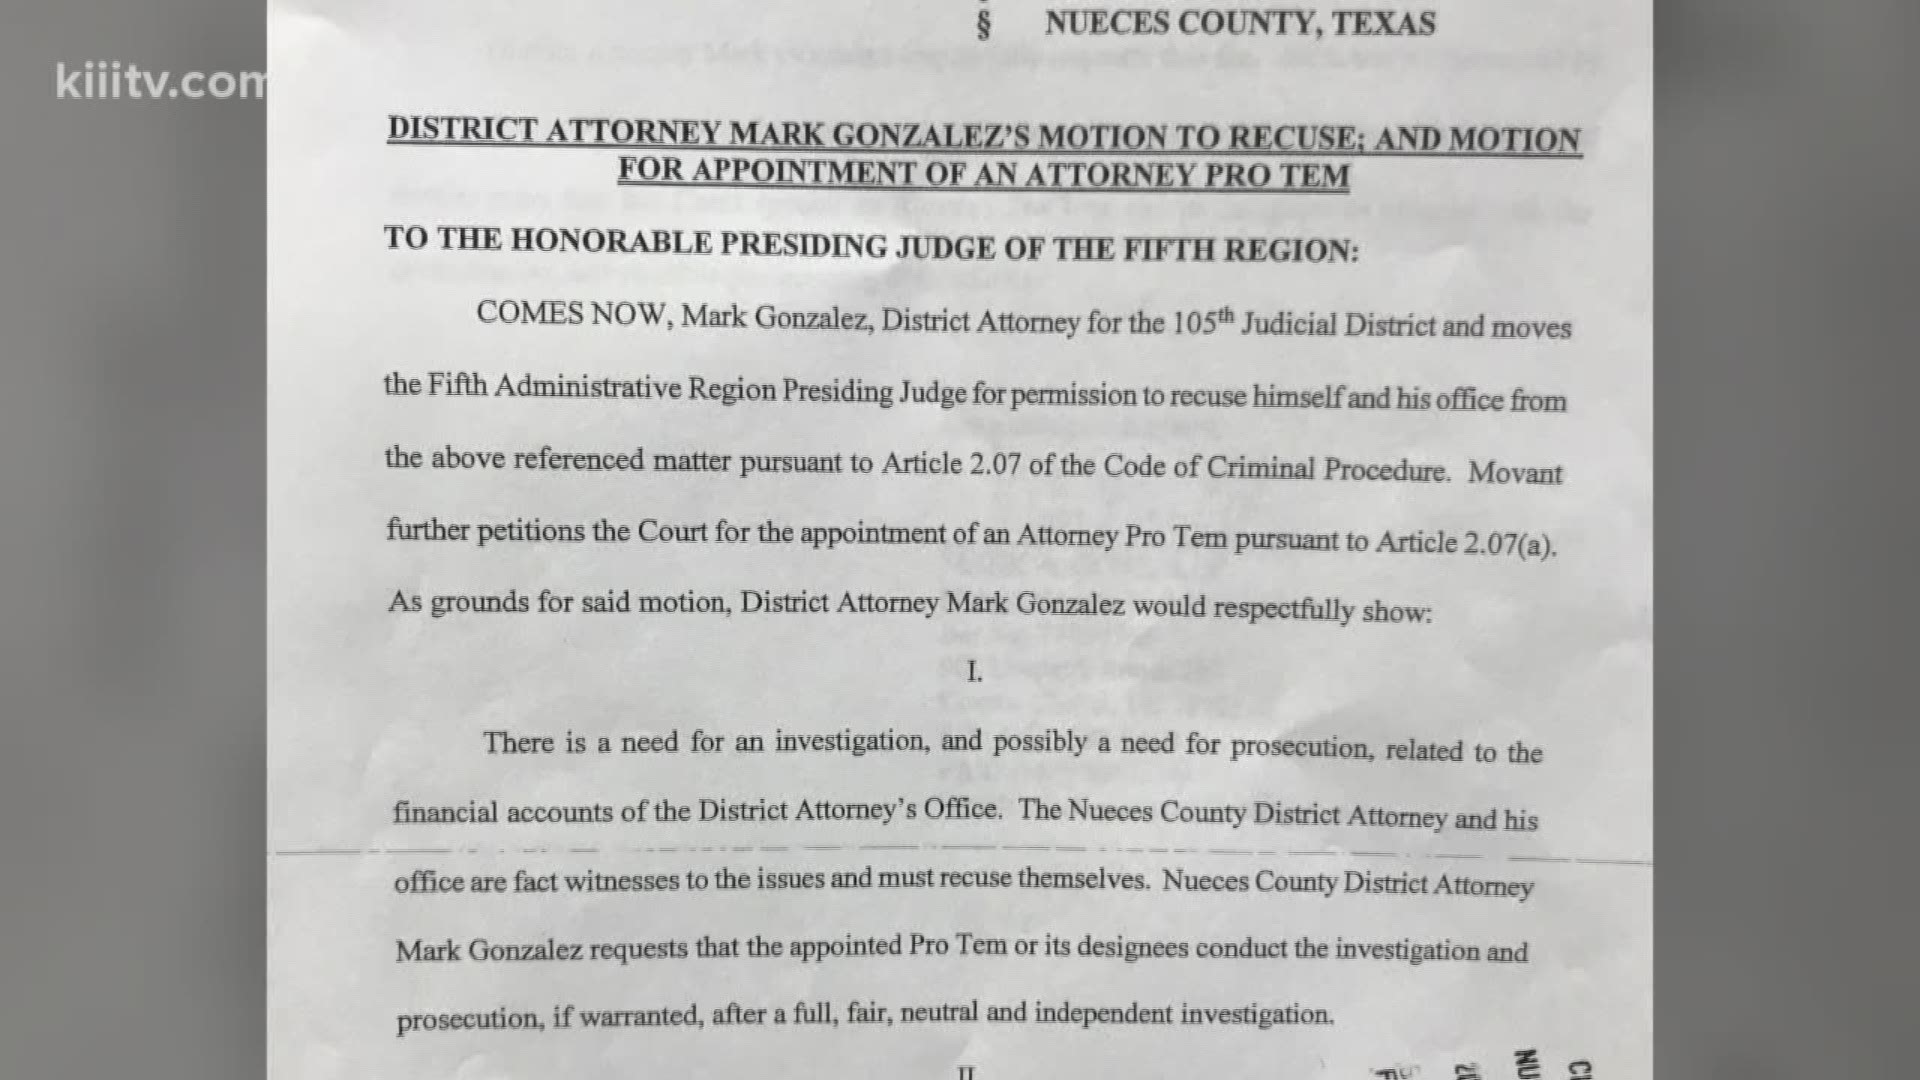 The Texas Attorney General's Office has been called in to investigate some serious allegations facing the Nueces County District Attorney's Office.